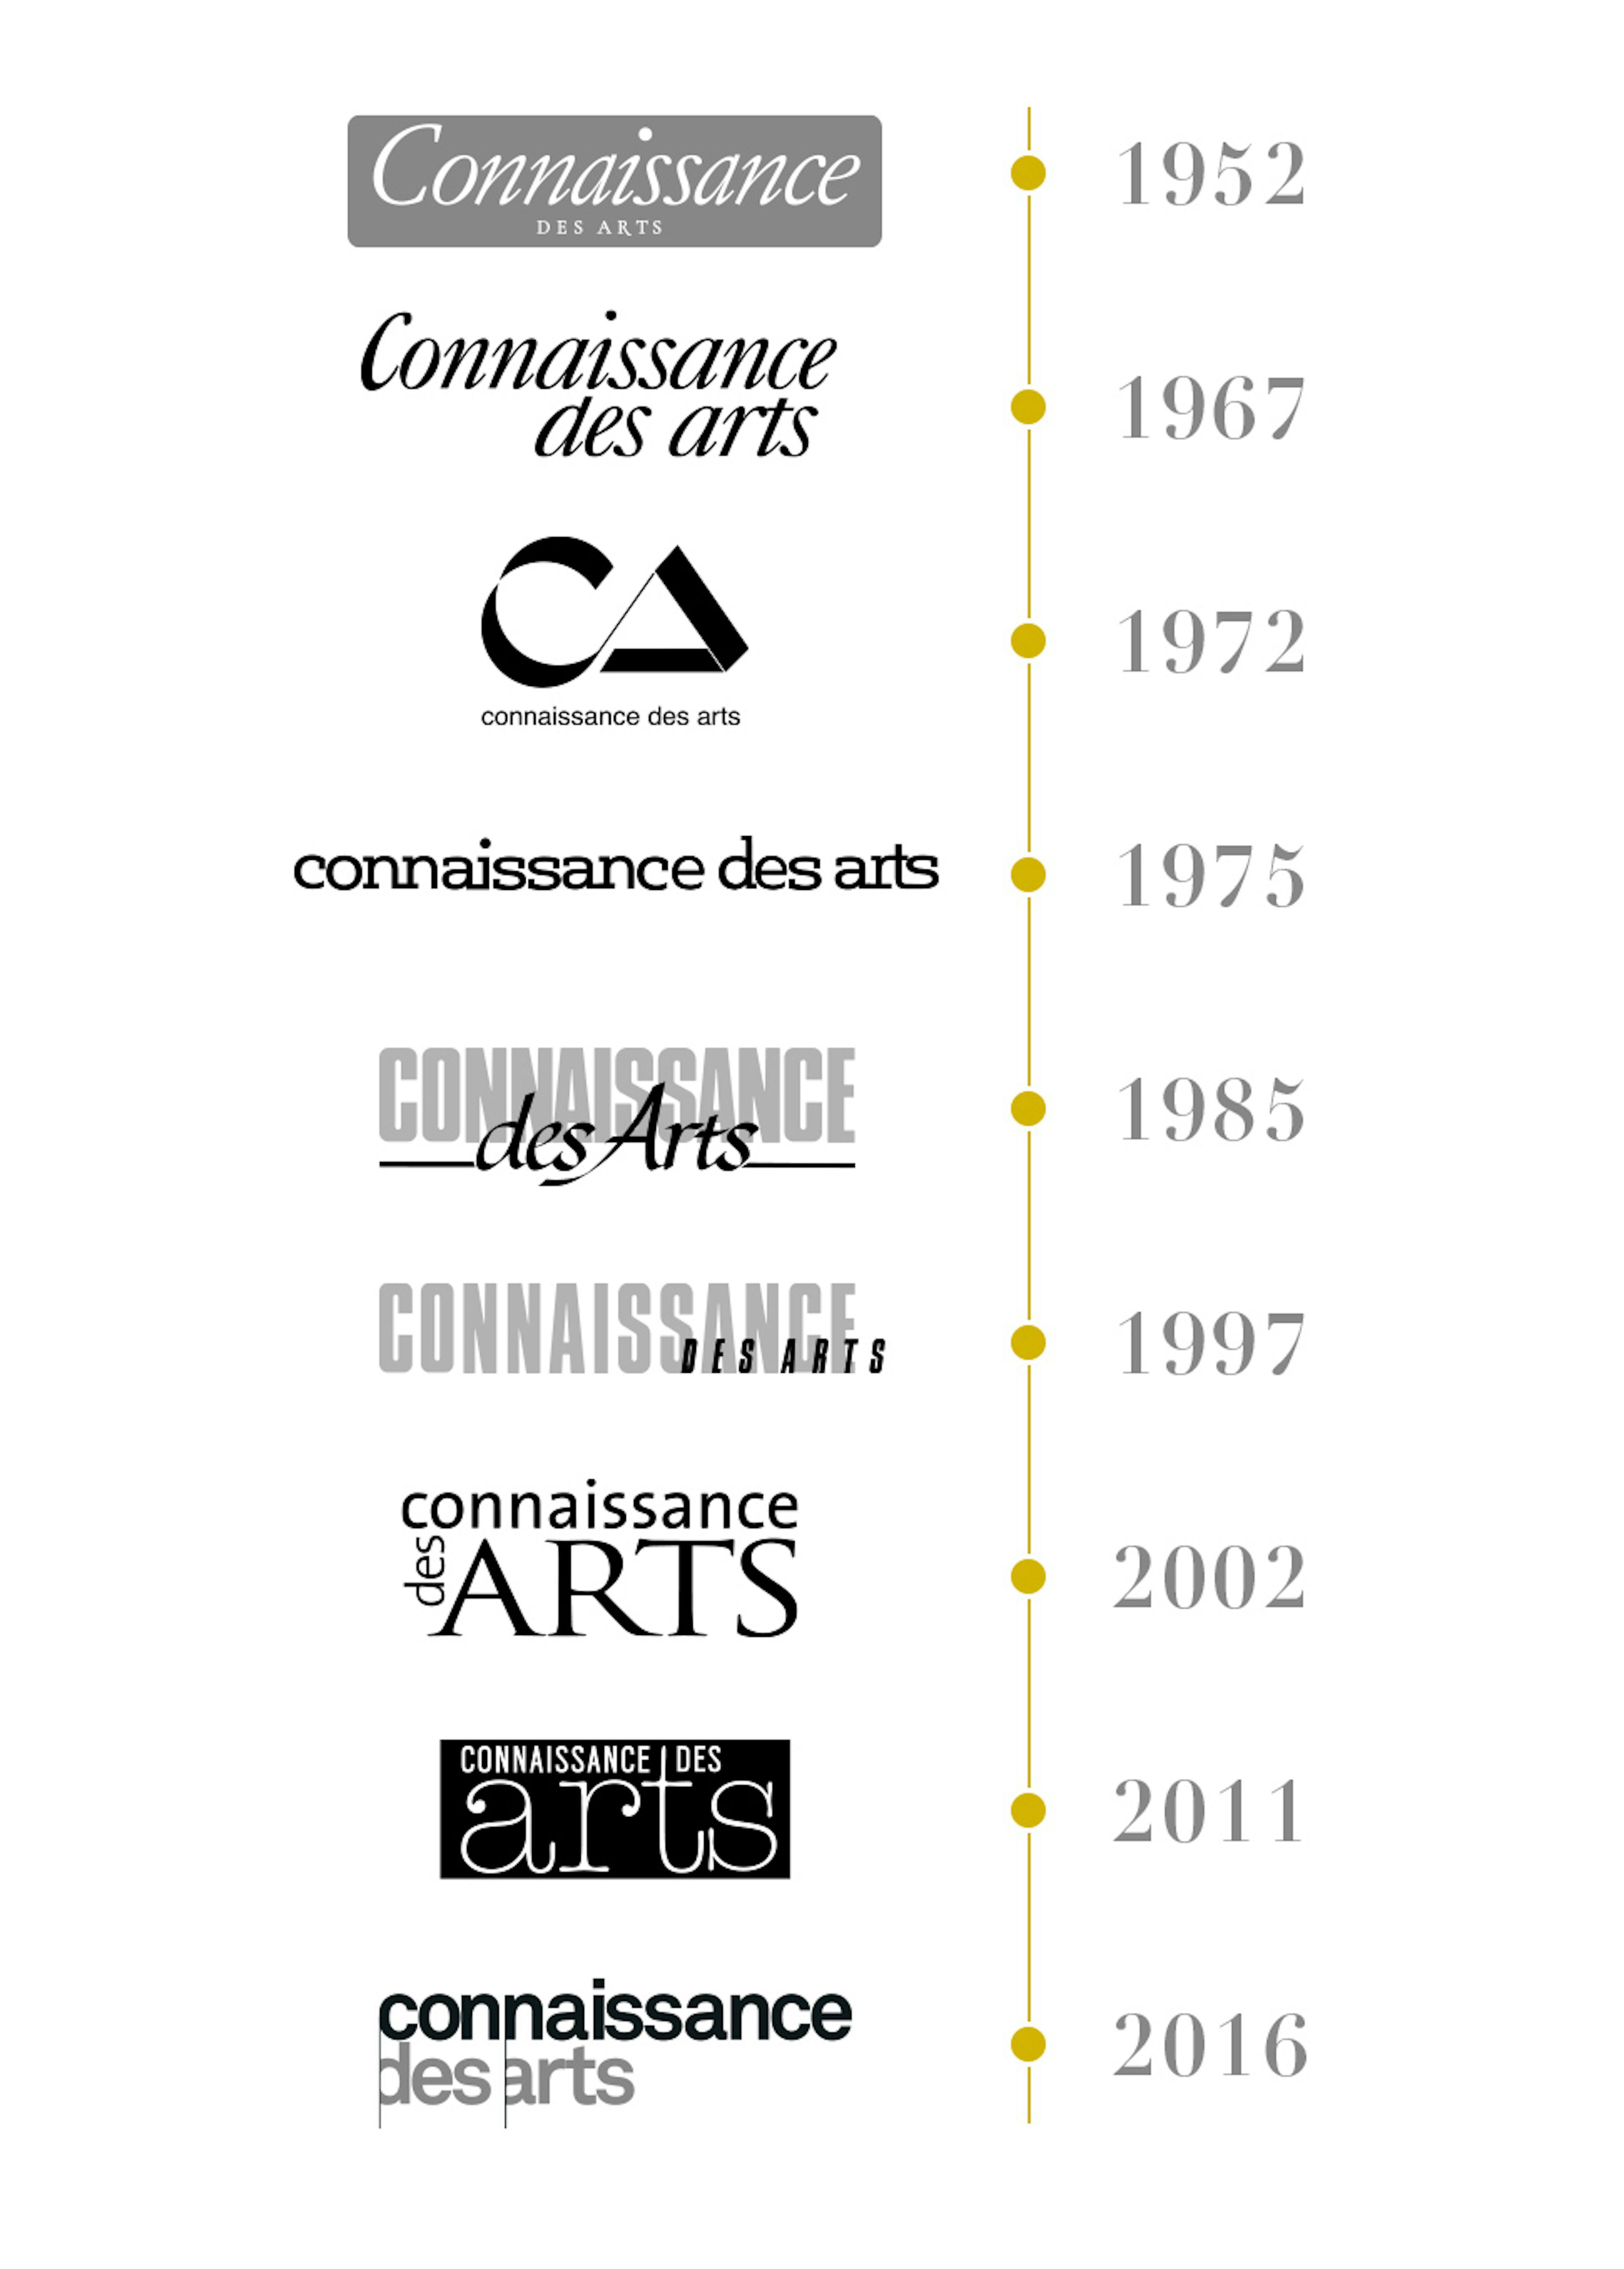 Connaissance des Arts logos from 1952 to the present © Connaissance des Arts